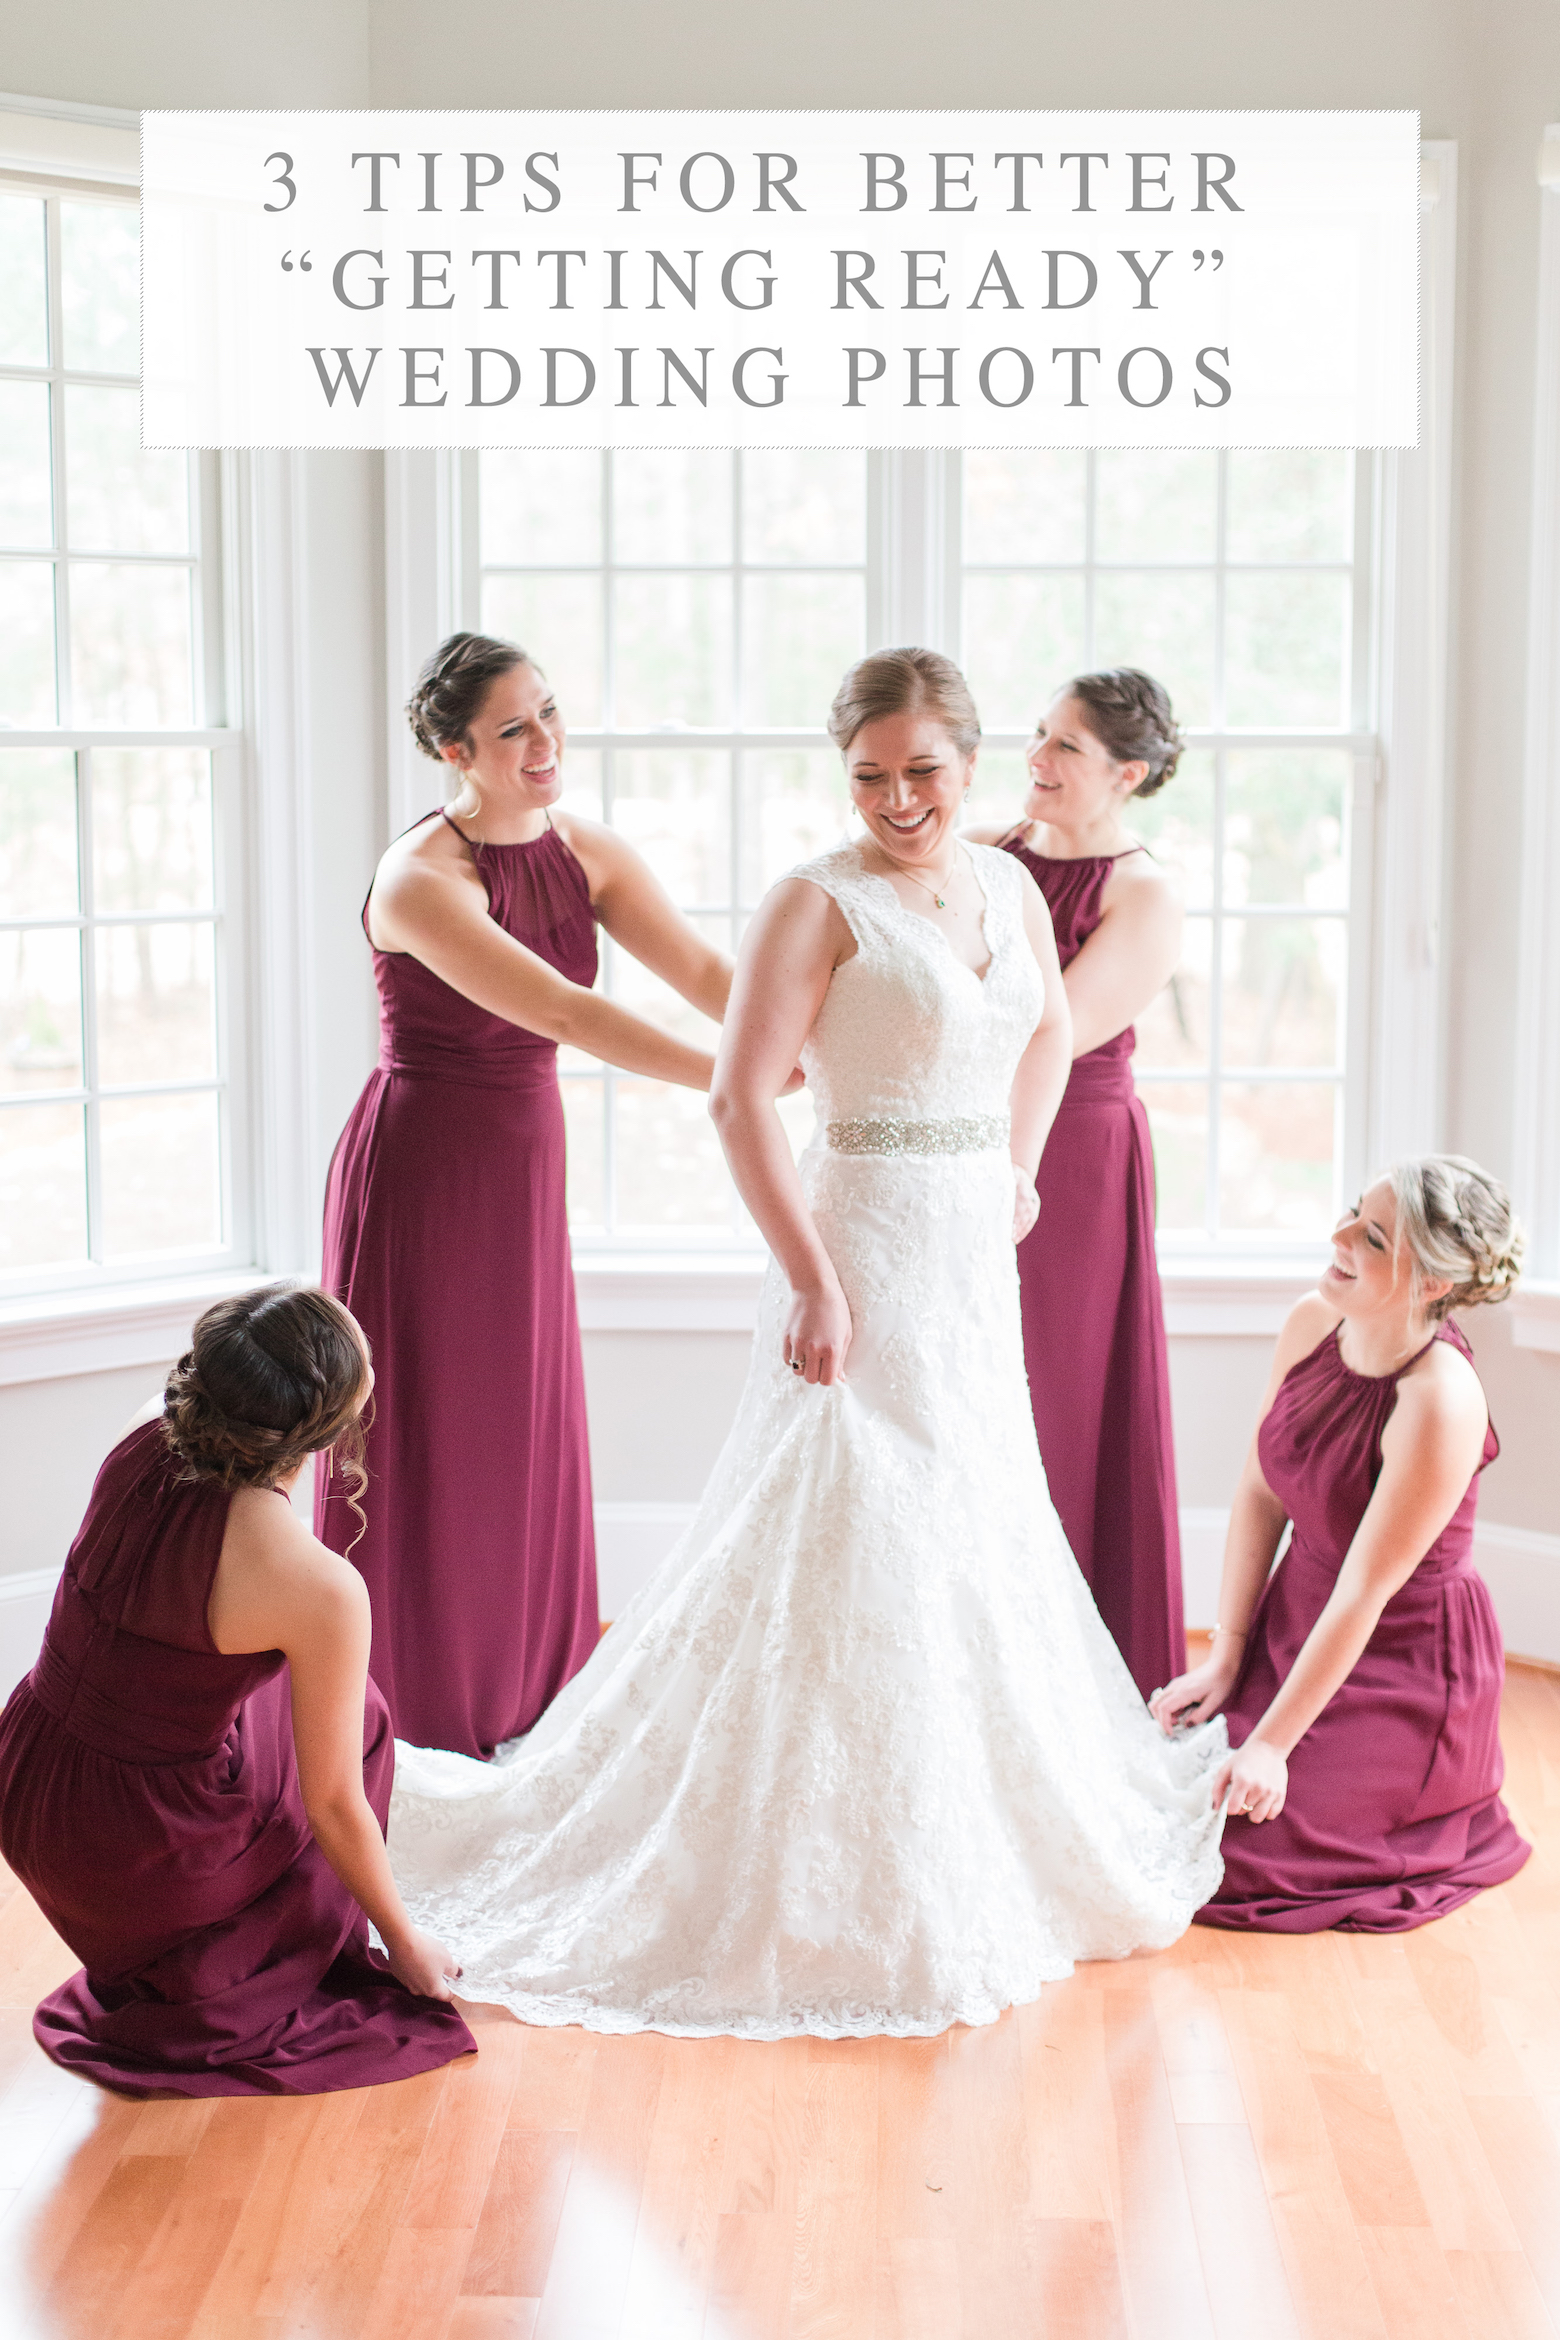 3 Tips for Better Getting Ready Wedding Photos | Angie McPherson Photography